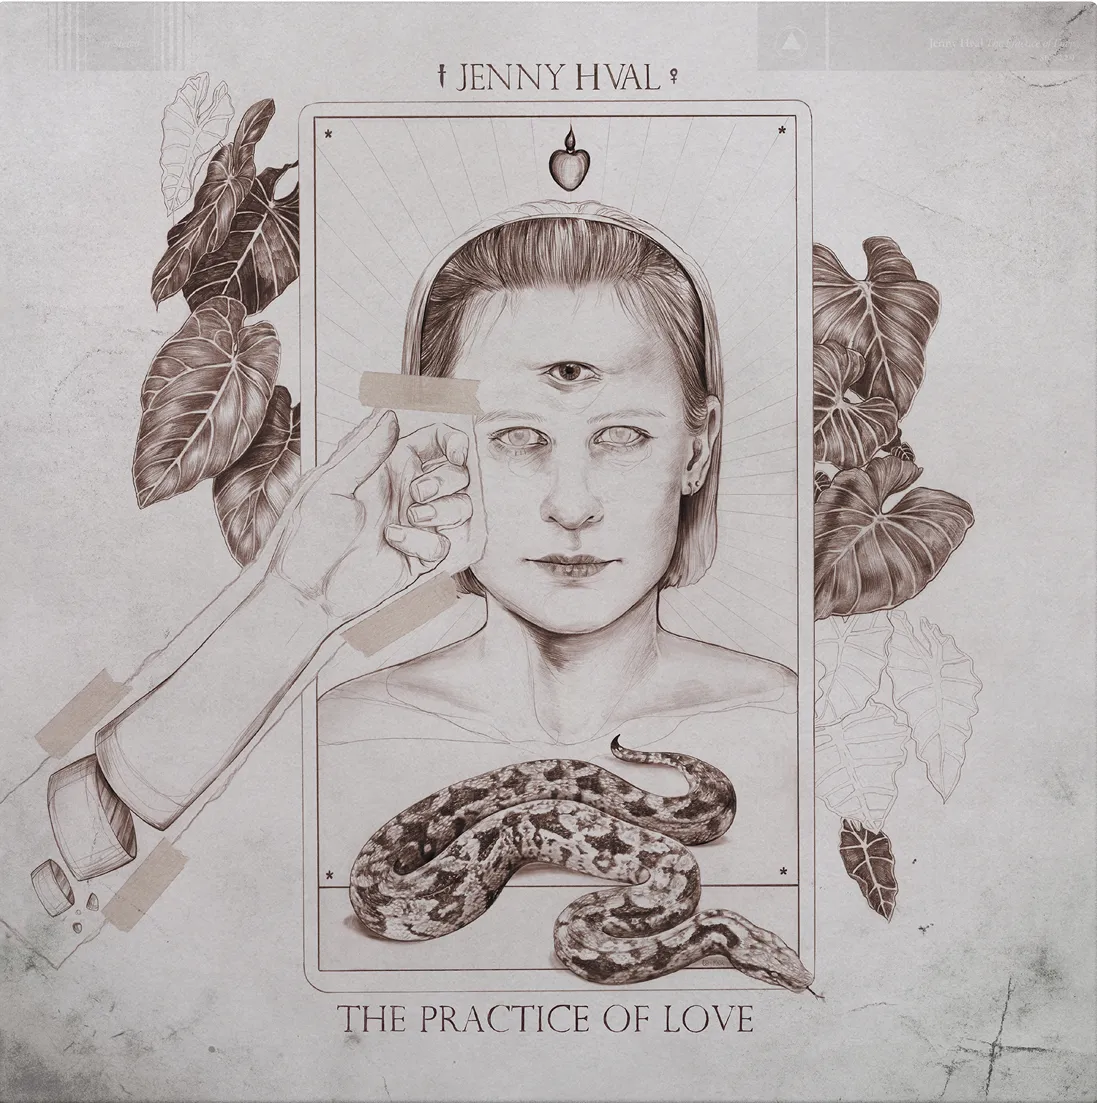 <strong>Jenny Hval - The Practice of Love</strong> (Vinyl LP - black)